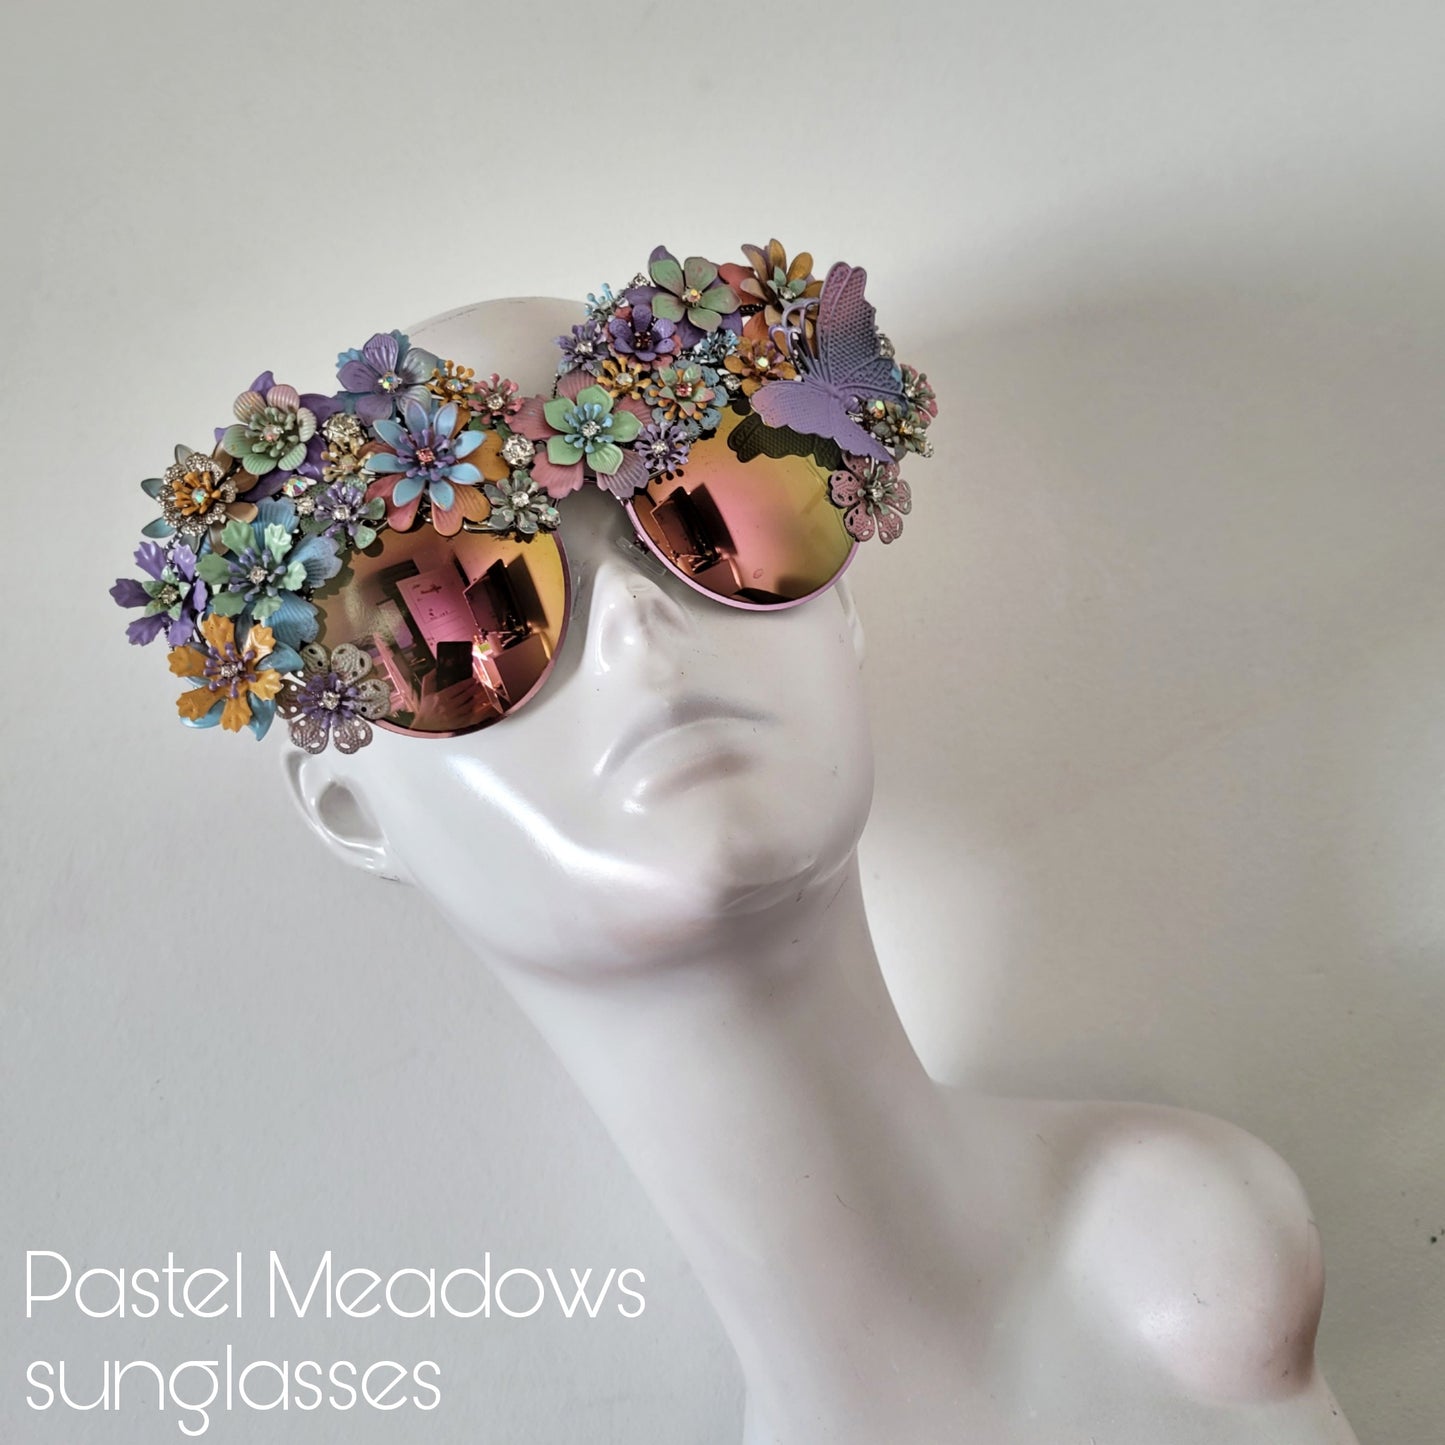 Meadows couture collection: The Pastel Meadow sunglasses